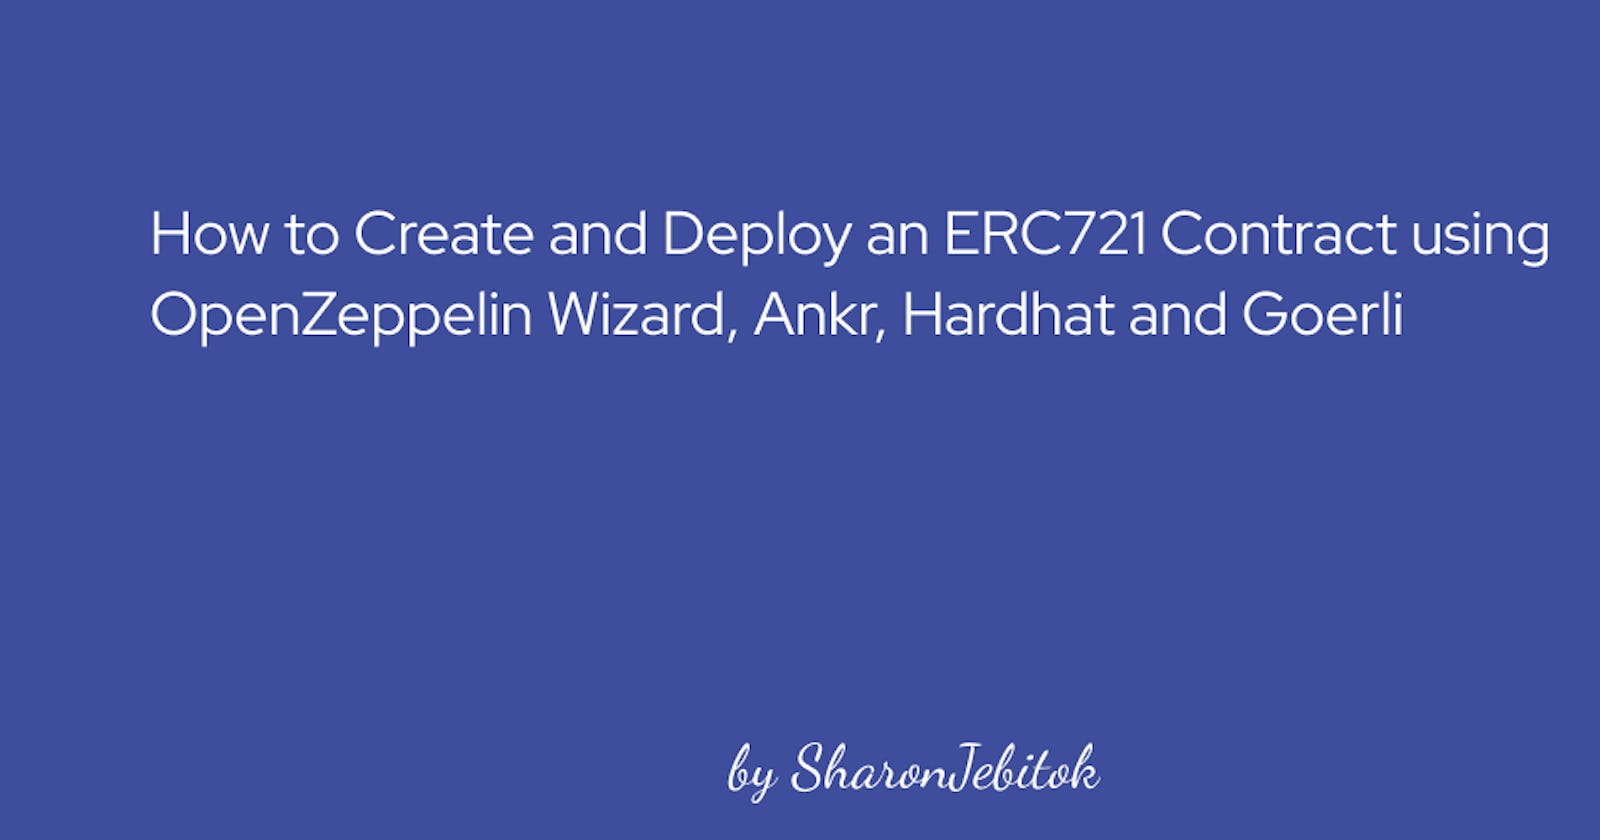 How to create and deploy an ERC721 contract using OpenZeppelin Wizard, Ankr, Goerli, and Hardhat